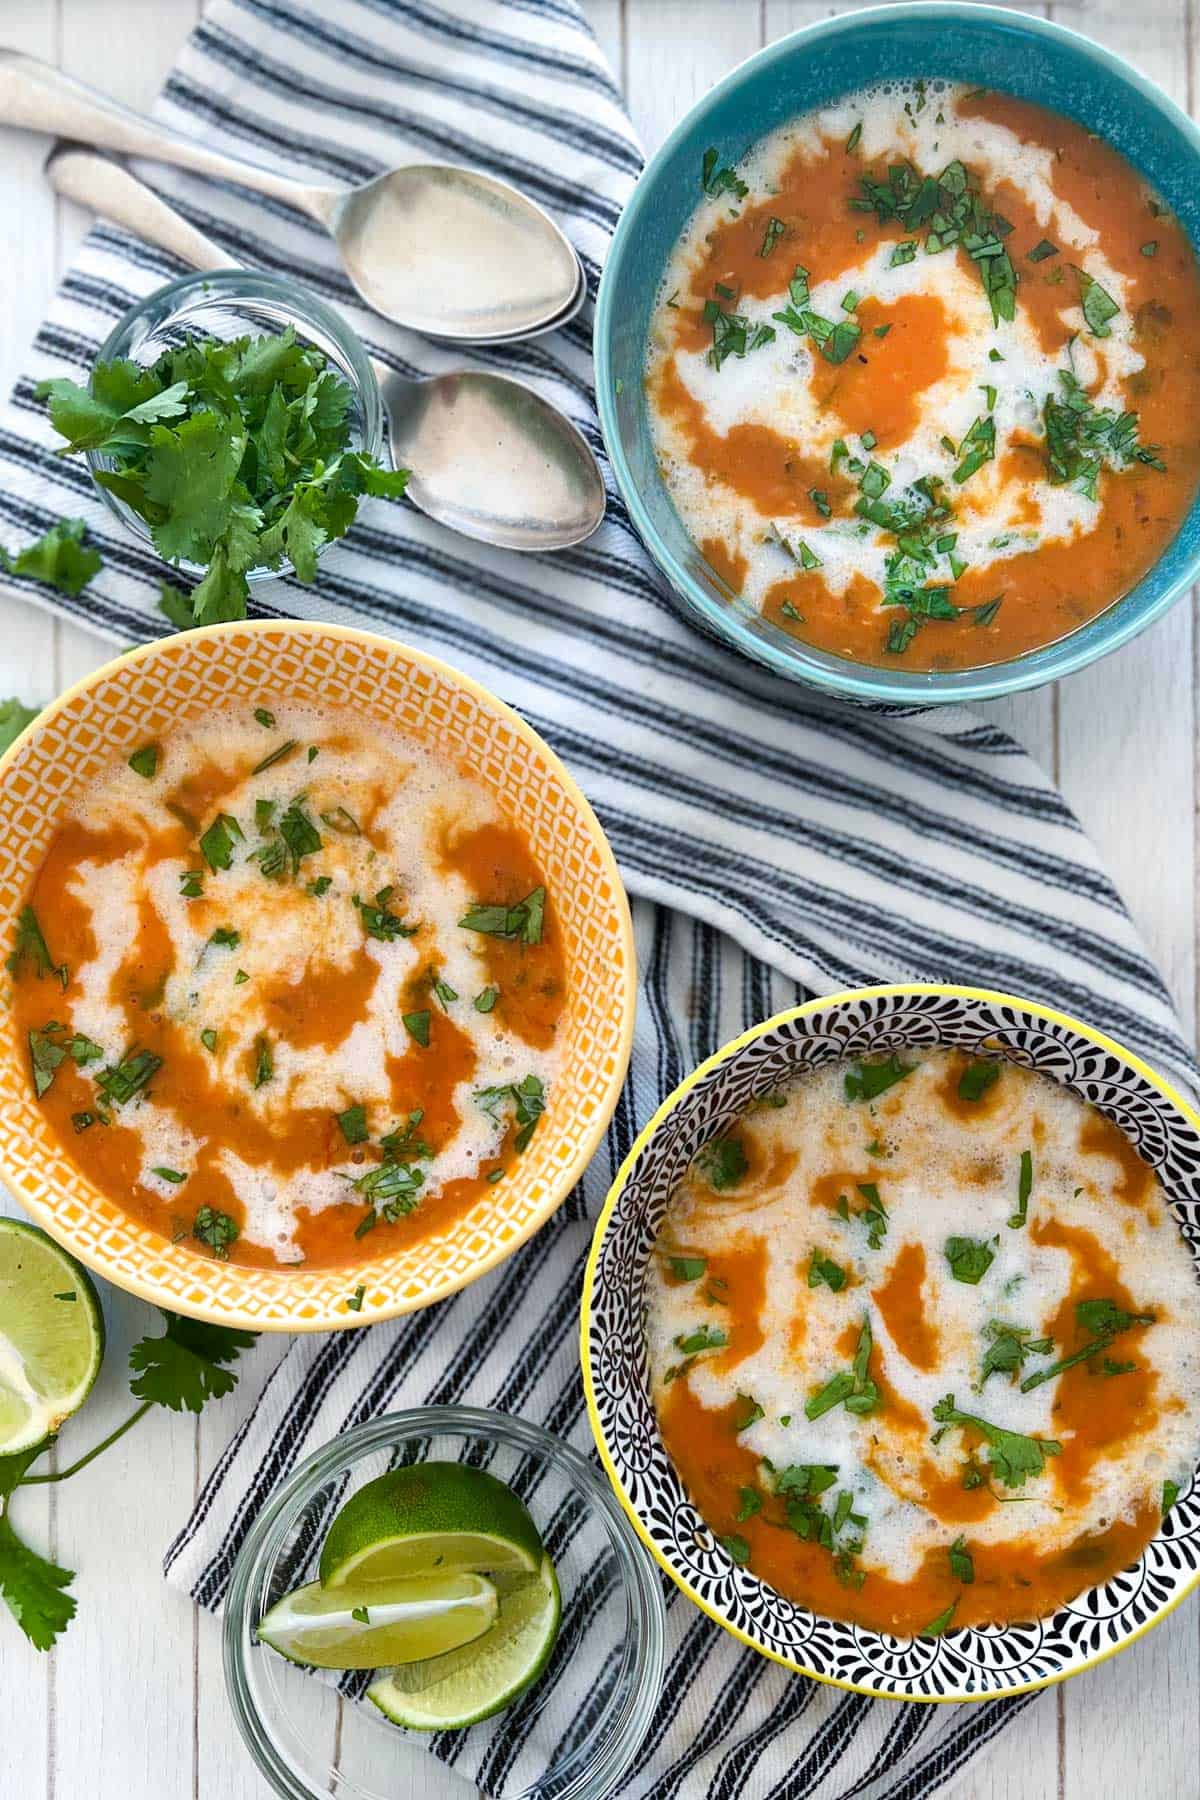 three bowls on a black and white striped dish towel, filled with red lentil soup drizzled with coconut milk and garnished with chopped cilantro